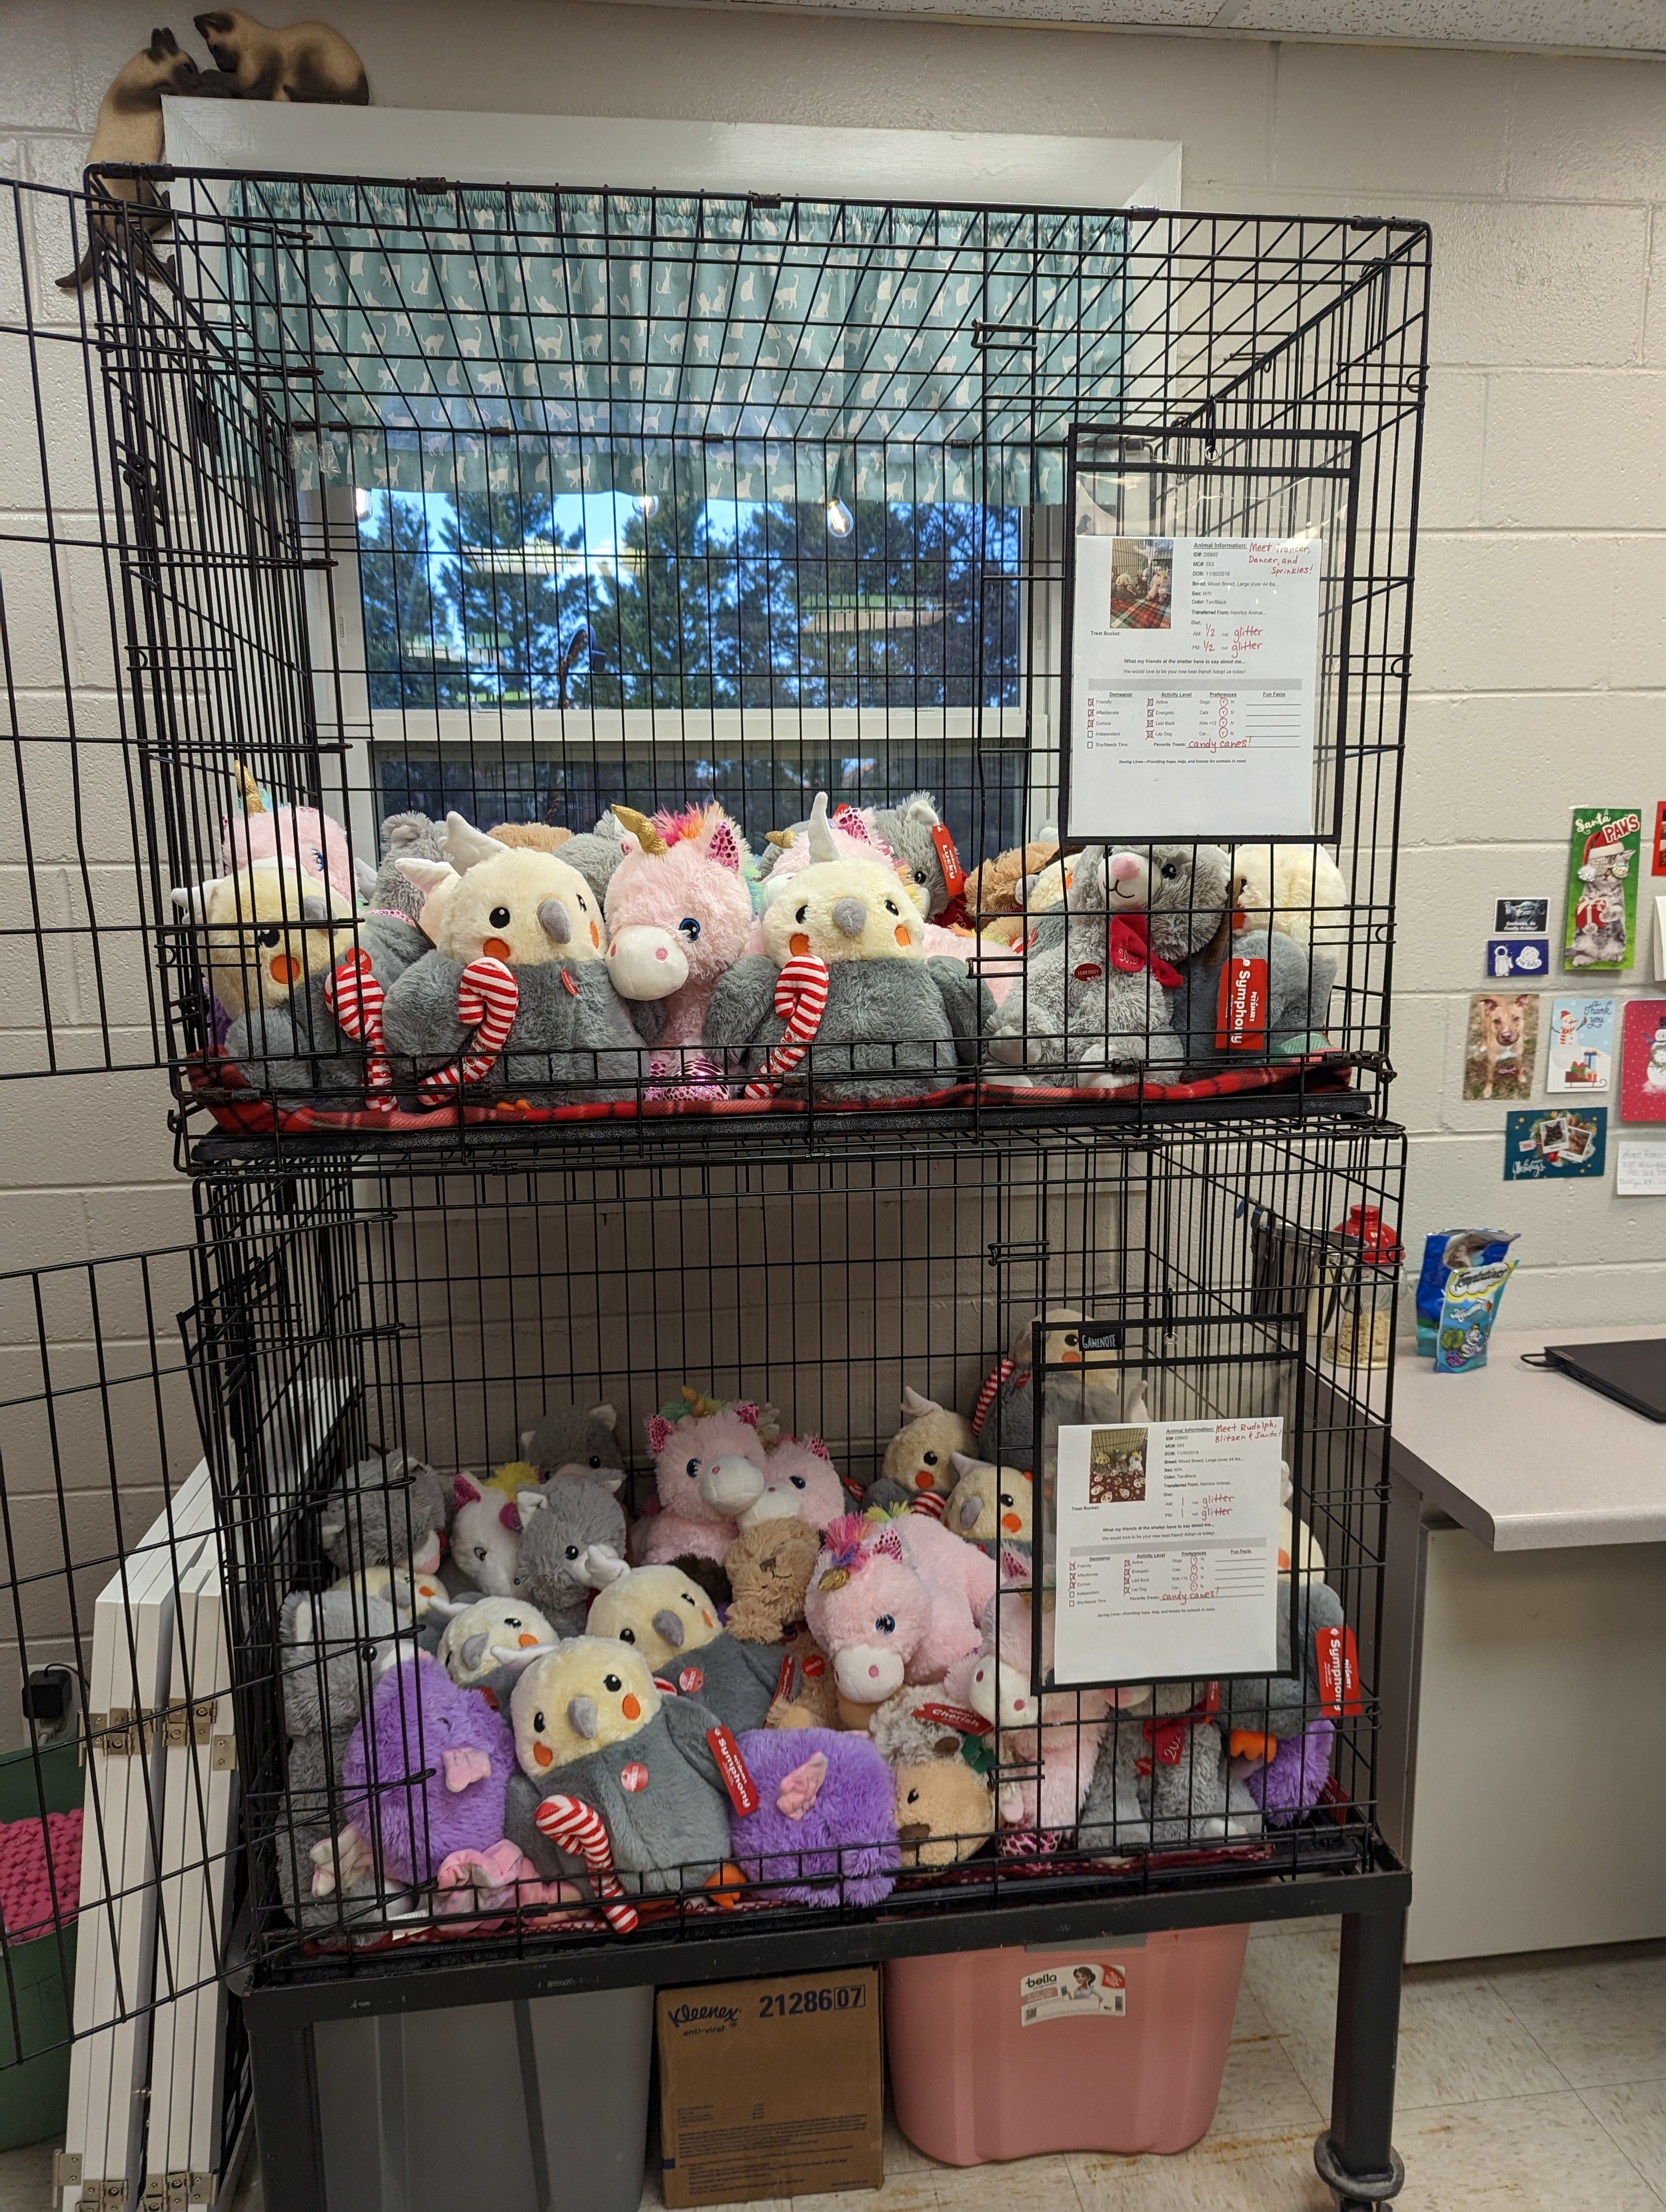 We had adoptable stuffies for the children in attendance